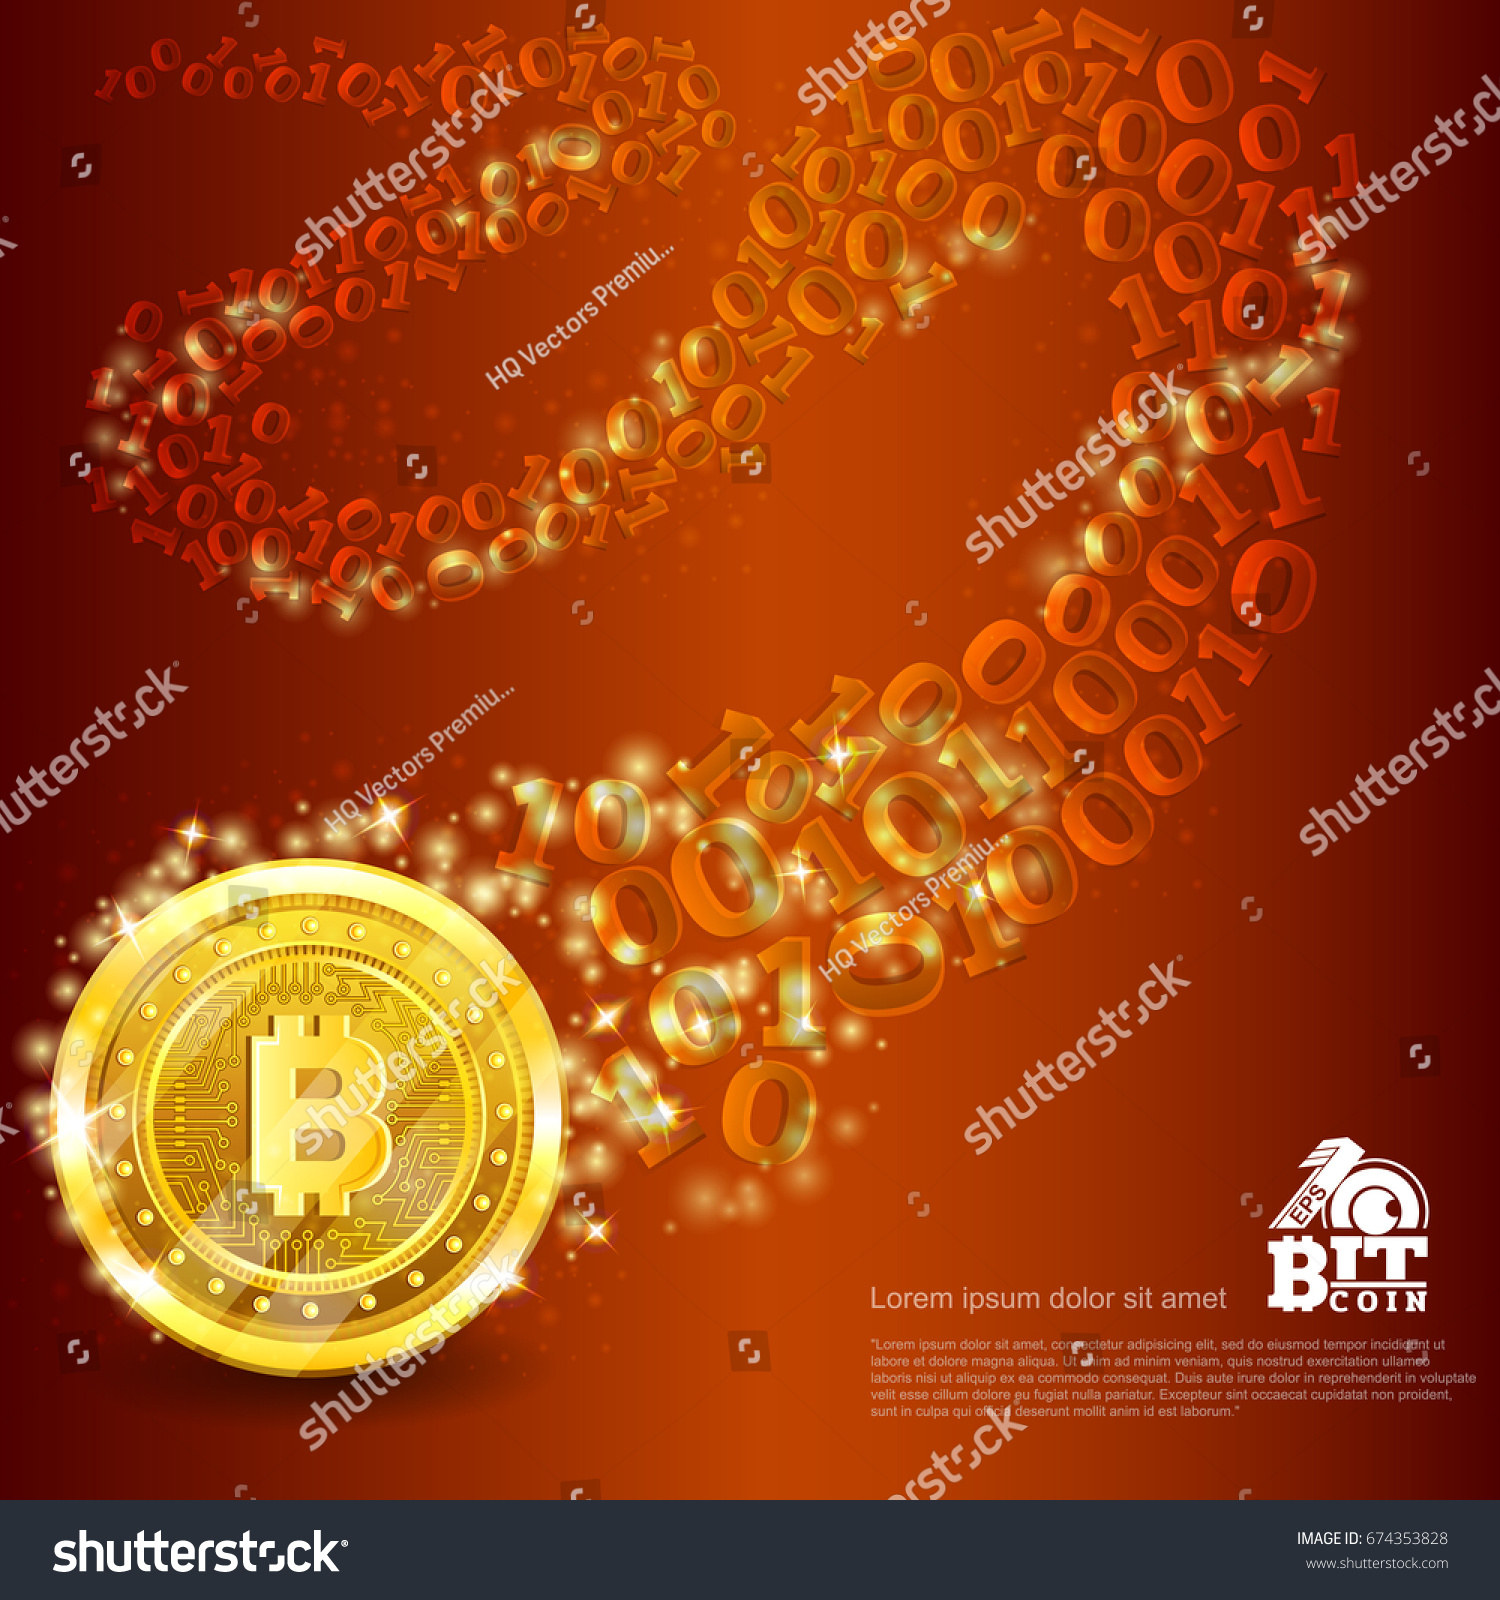 SVG of Golden bit coins and stars on red glossy background svg